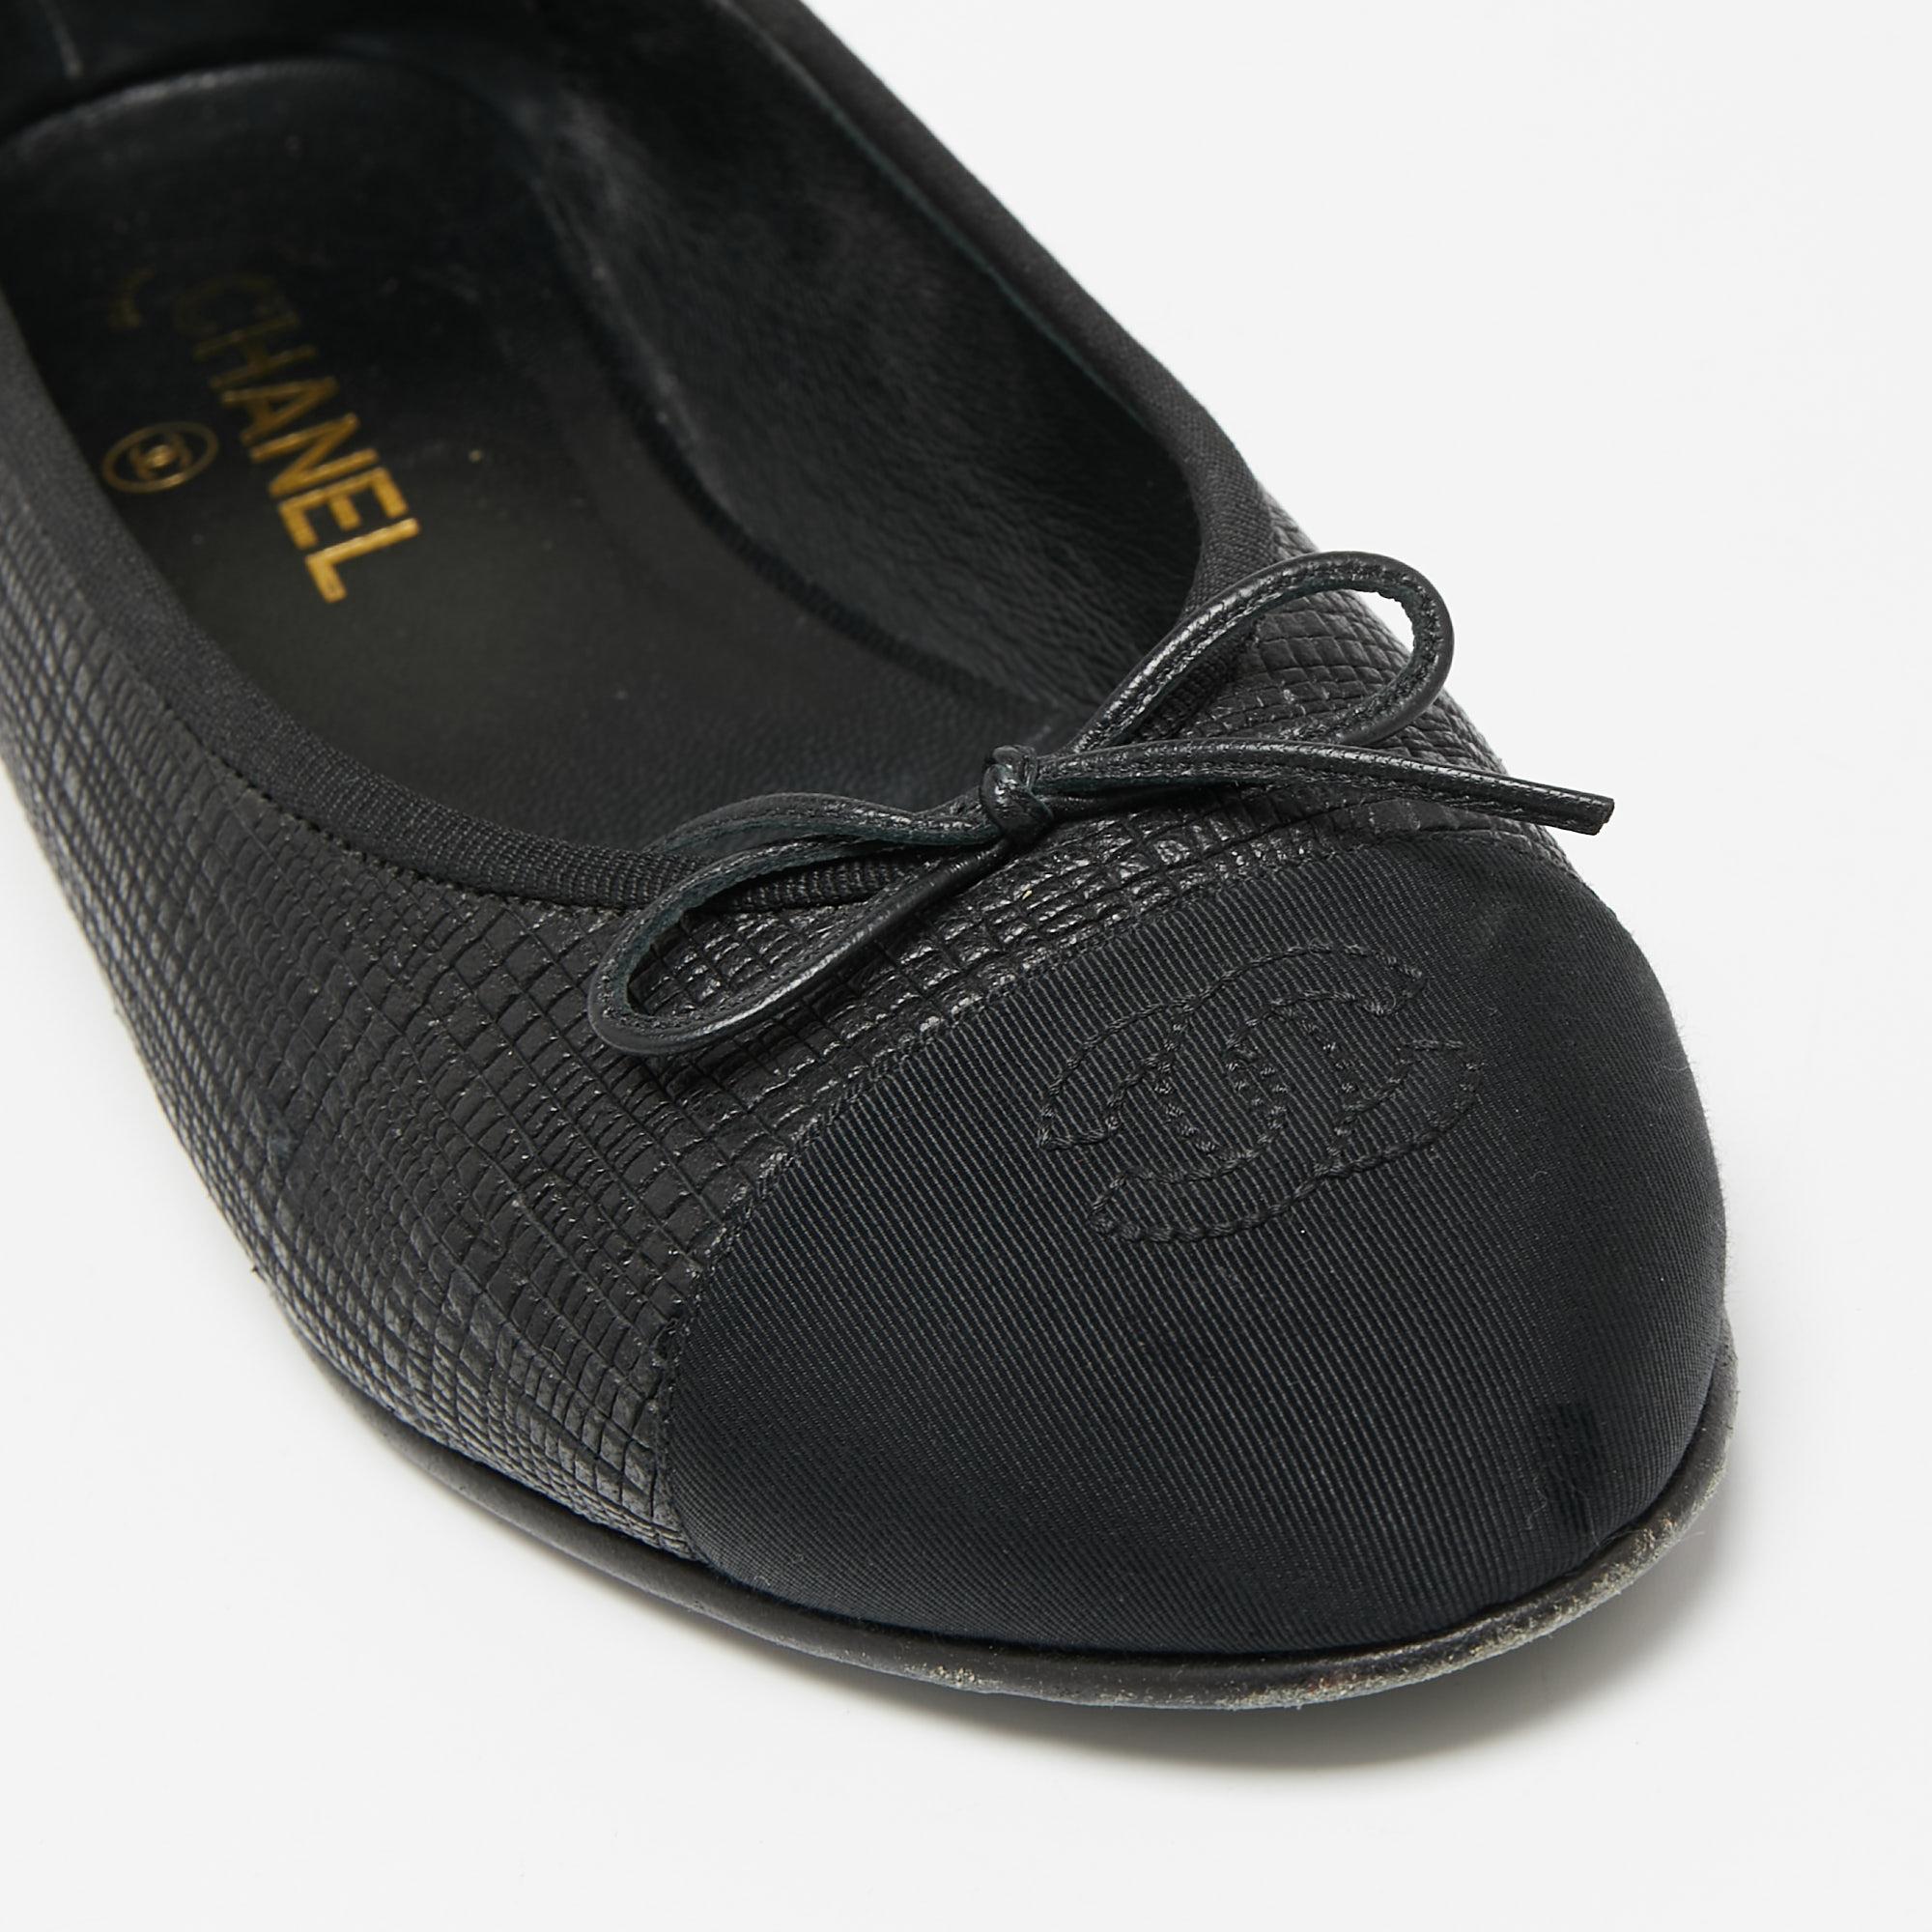 Chanel Black Textured Leather and Fabric CC Cap-Toe Bow Ballet Flats Size 40 1